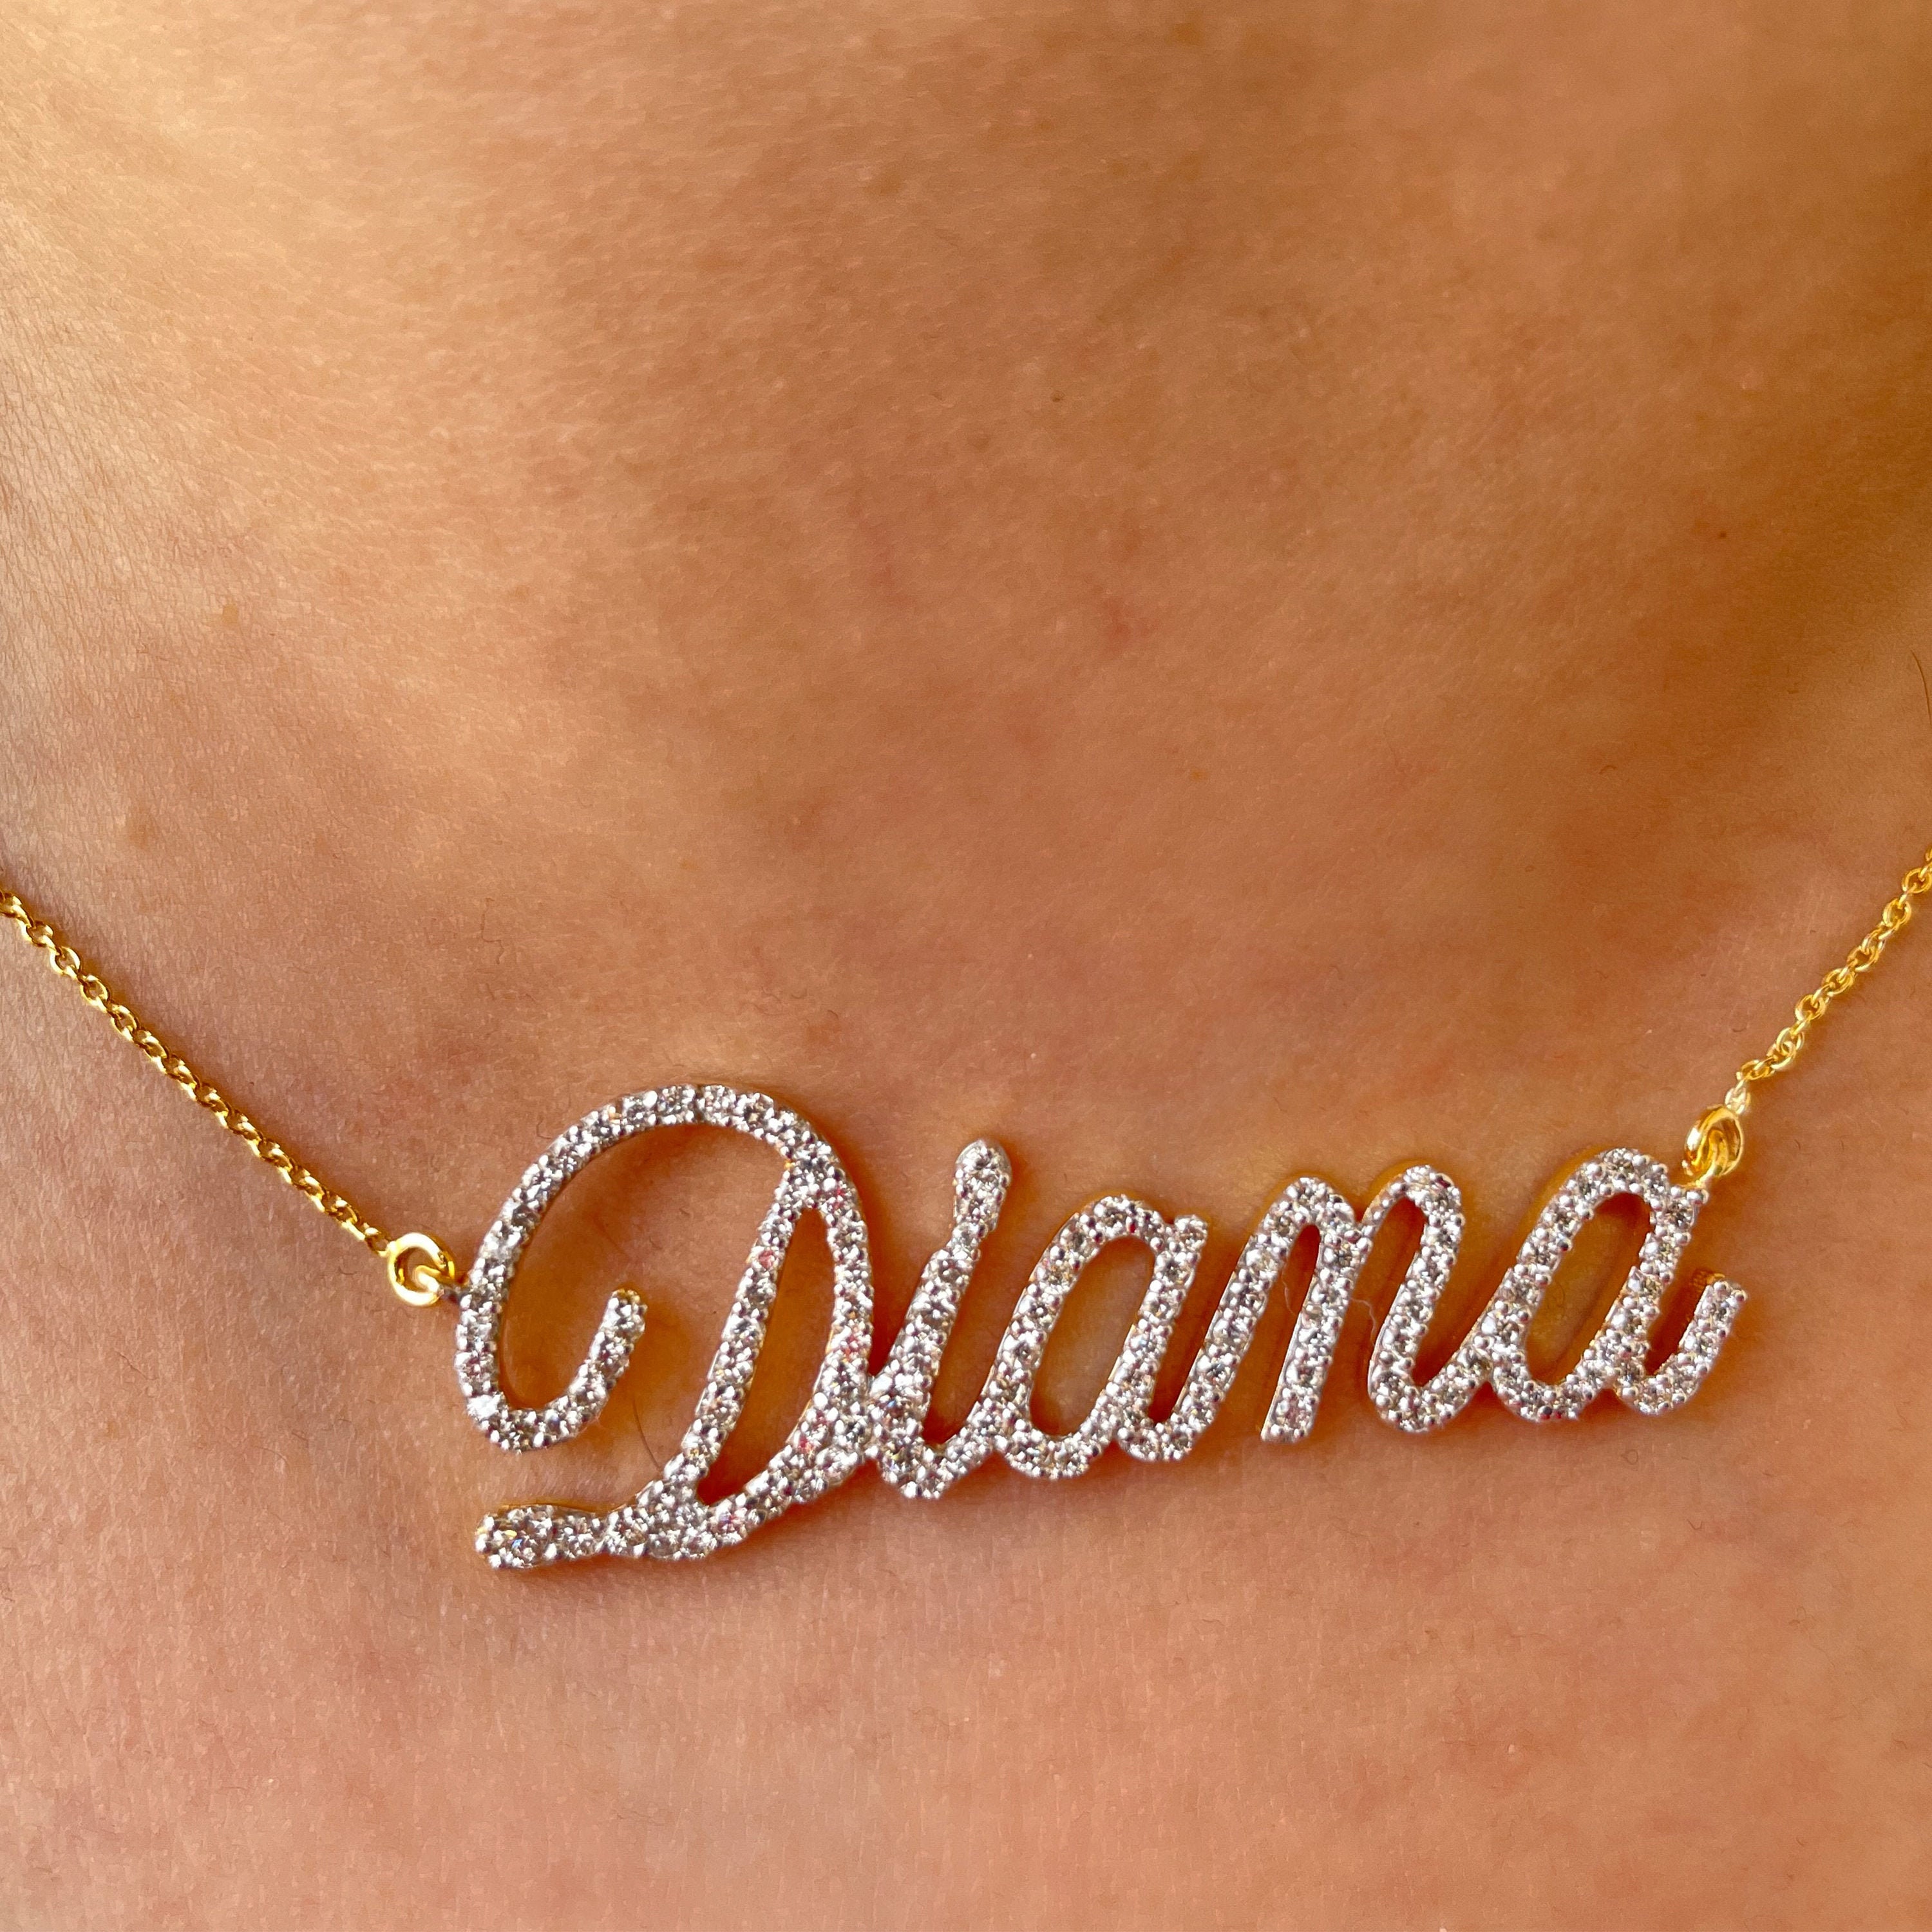 Diana Name Pendant Necklace, Personalized 1/4 Ct Diamond Necklace For Women